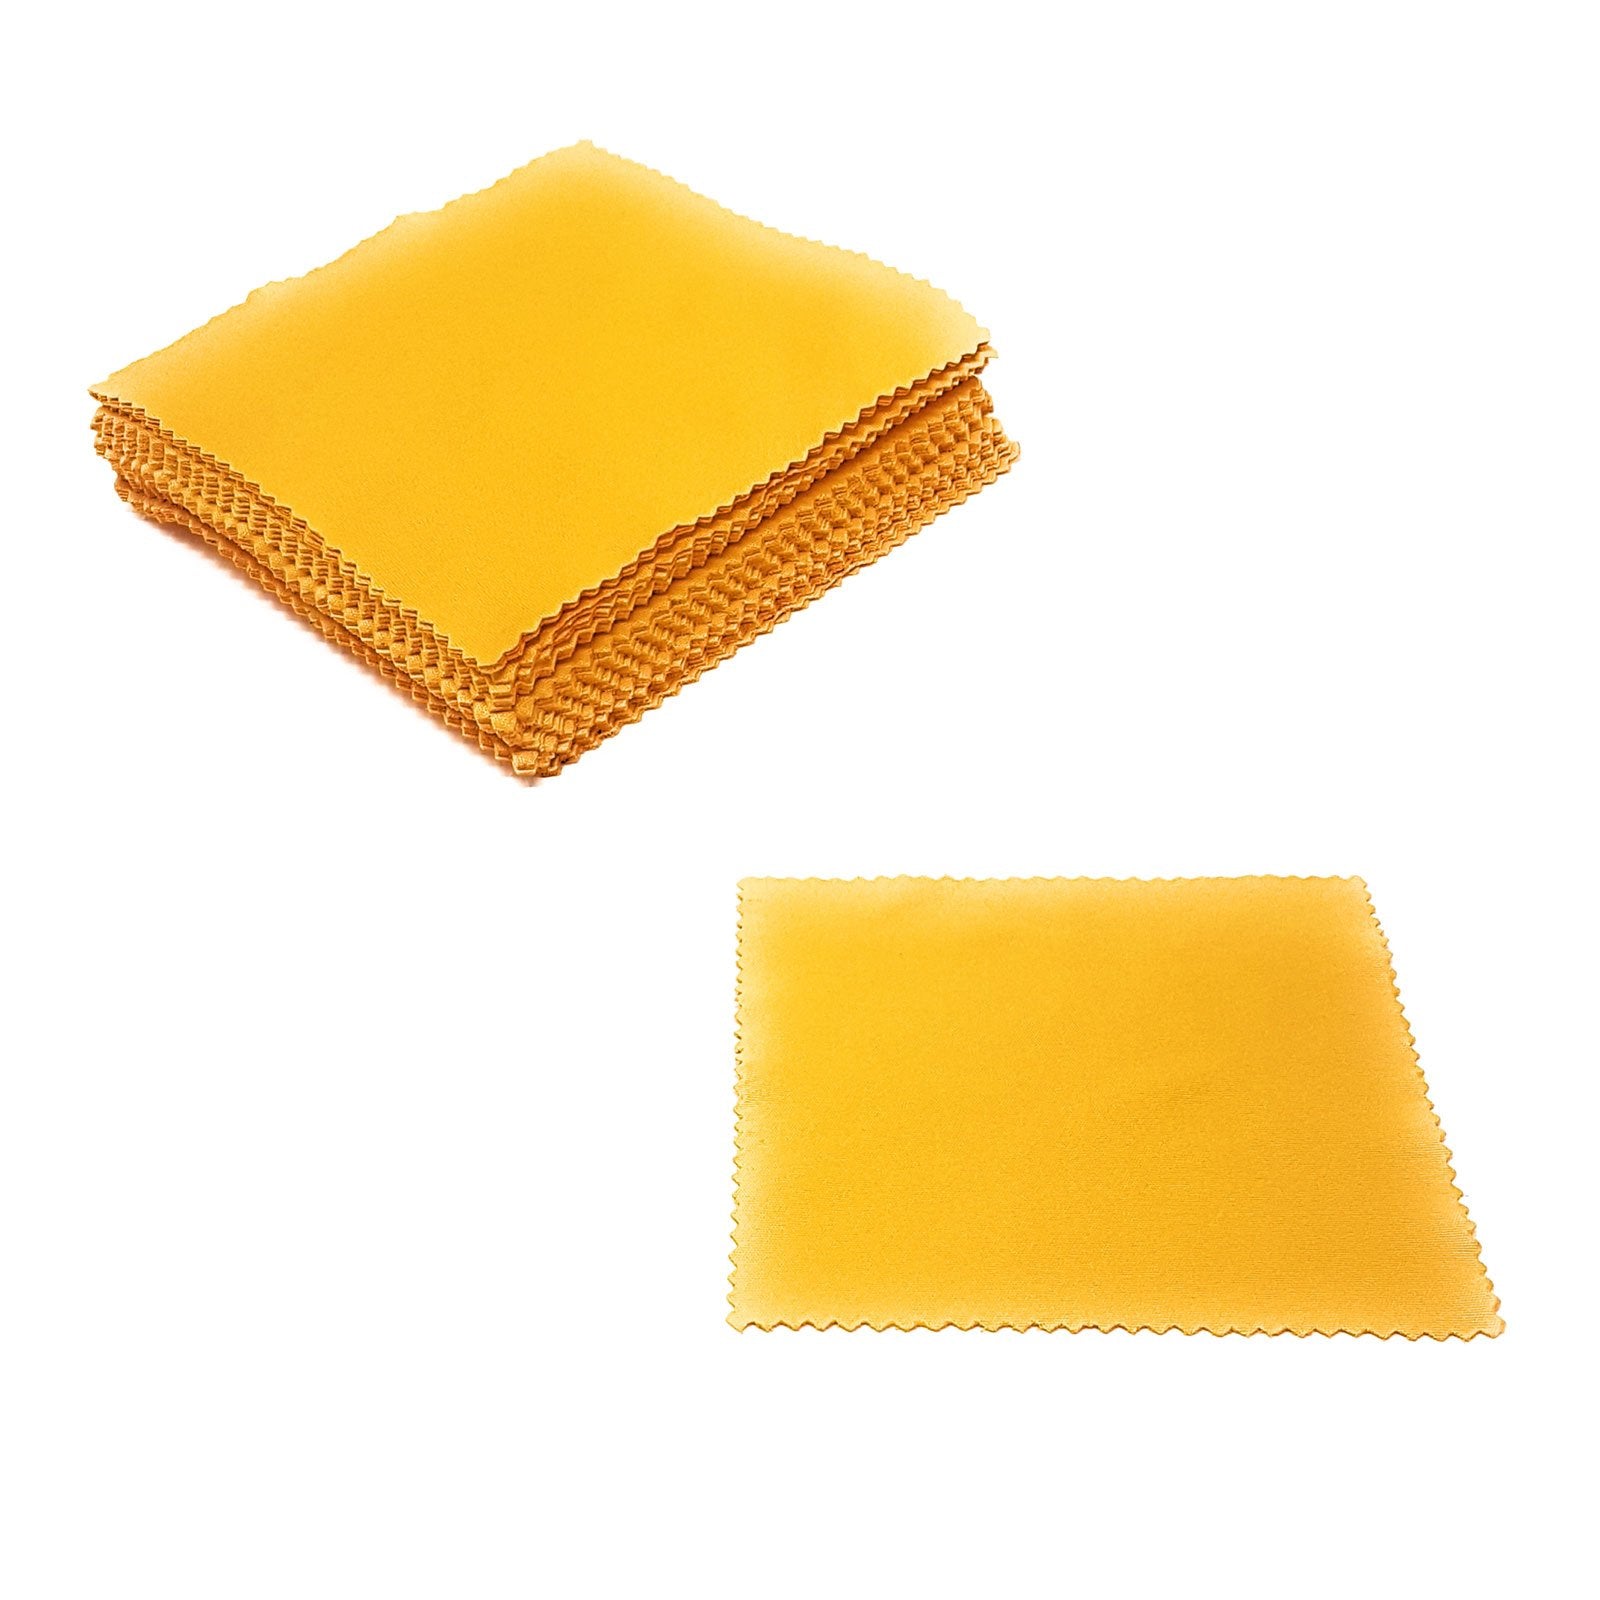 Wholesale Lens Cleaning Cloths - Yellow